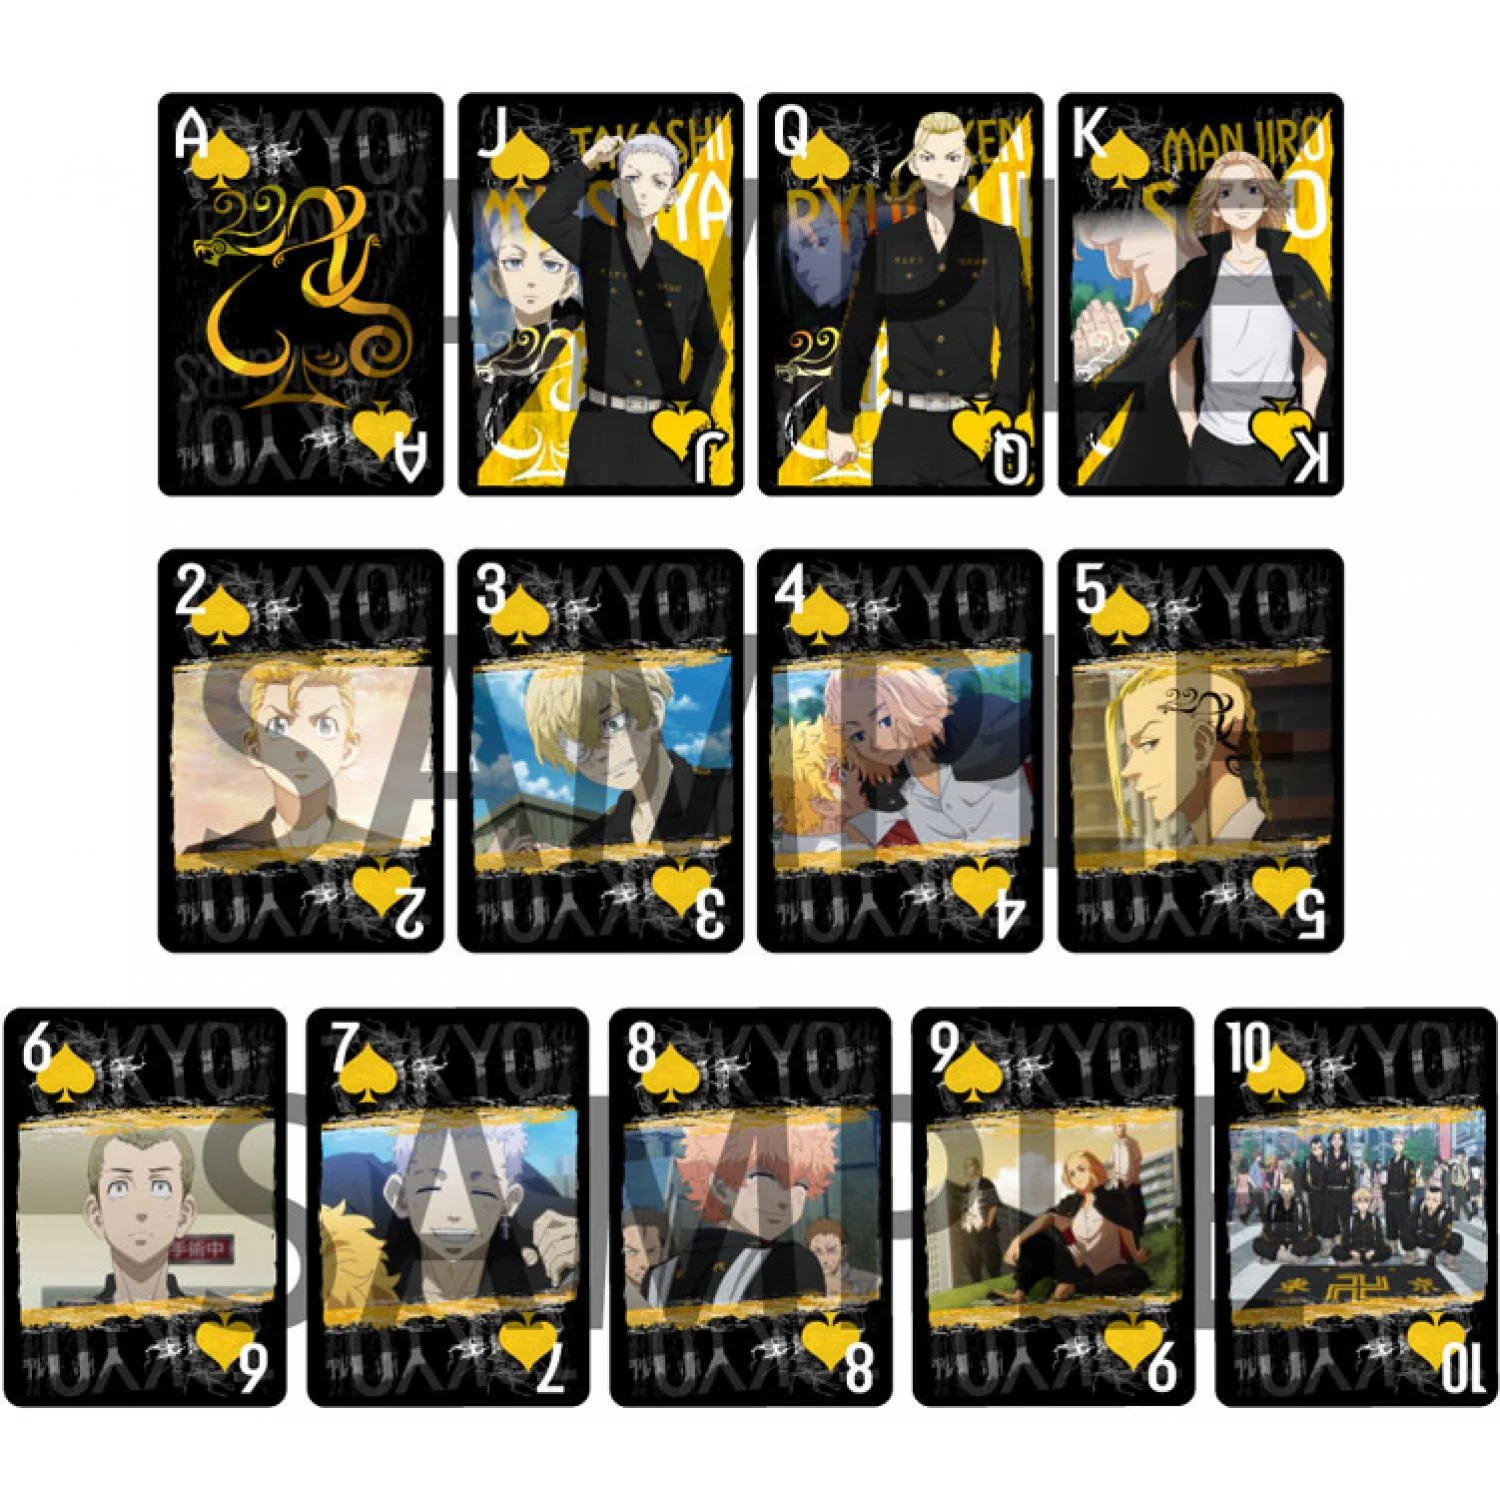 tokyo revengers playing cards 710335.2 - Fandomaniax Store